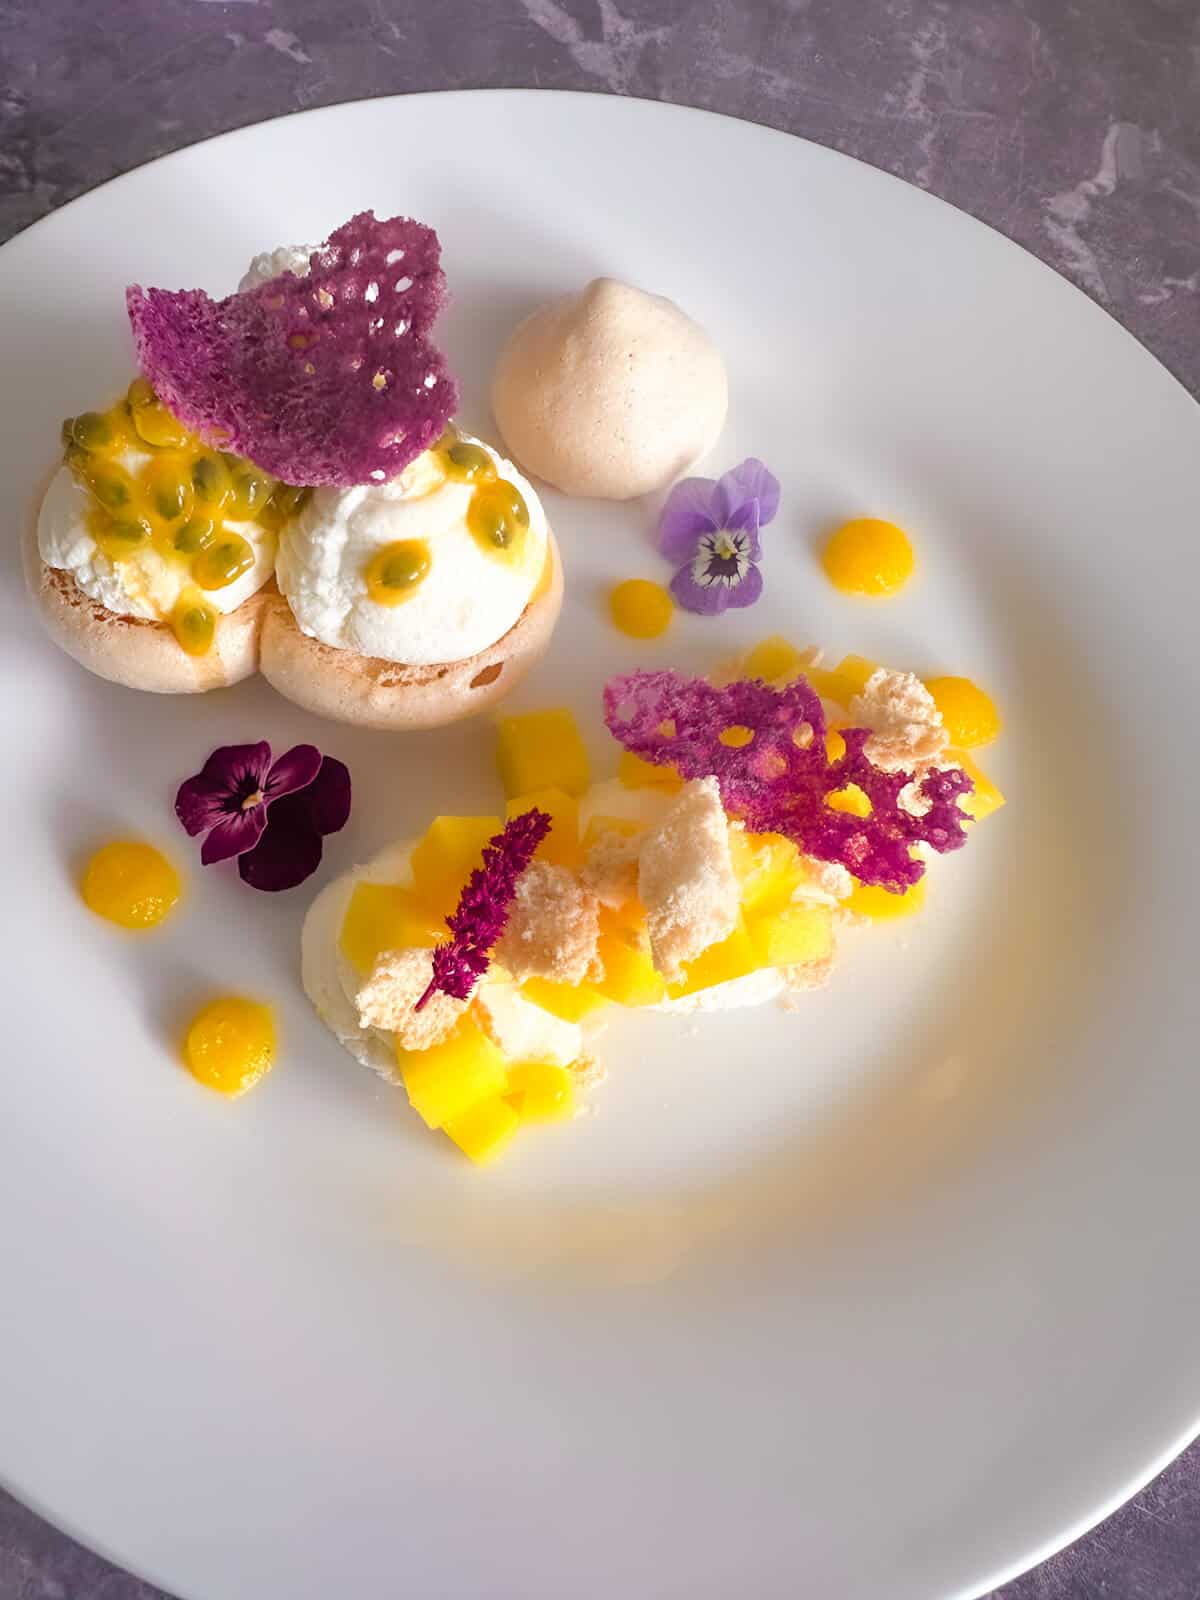 Mango Passion Fruit Eton Mess on a plate garnished with crumbled meringue and edible flowers. 